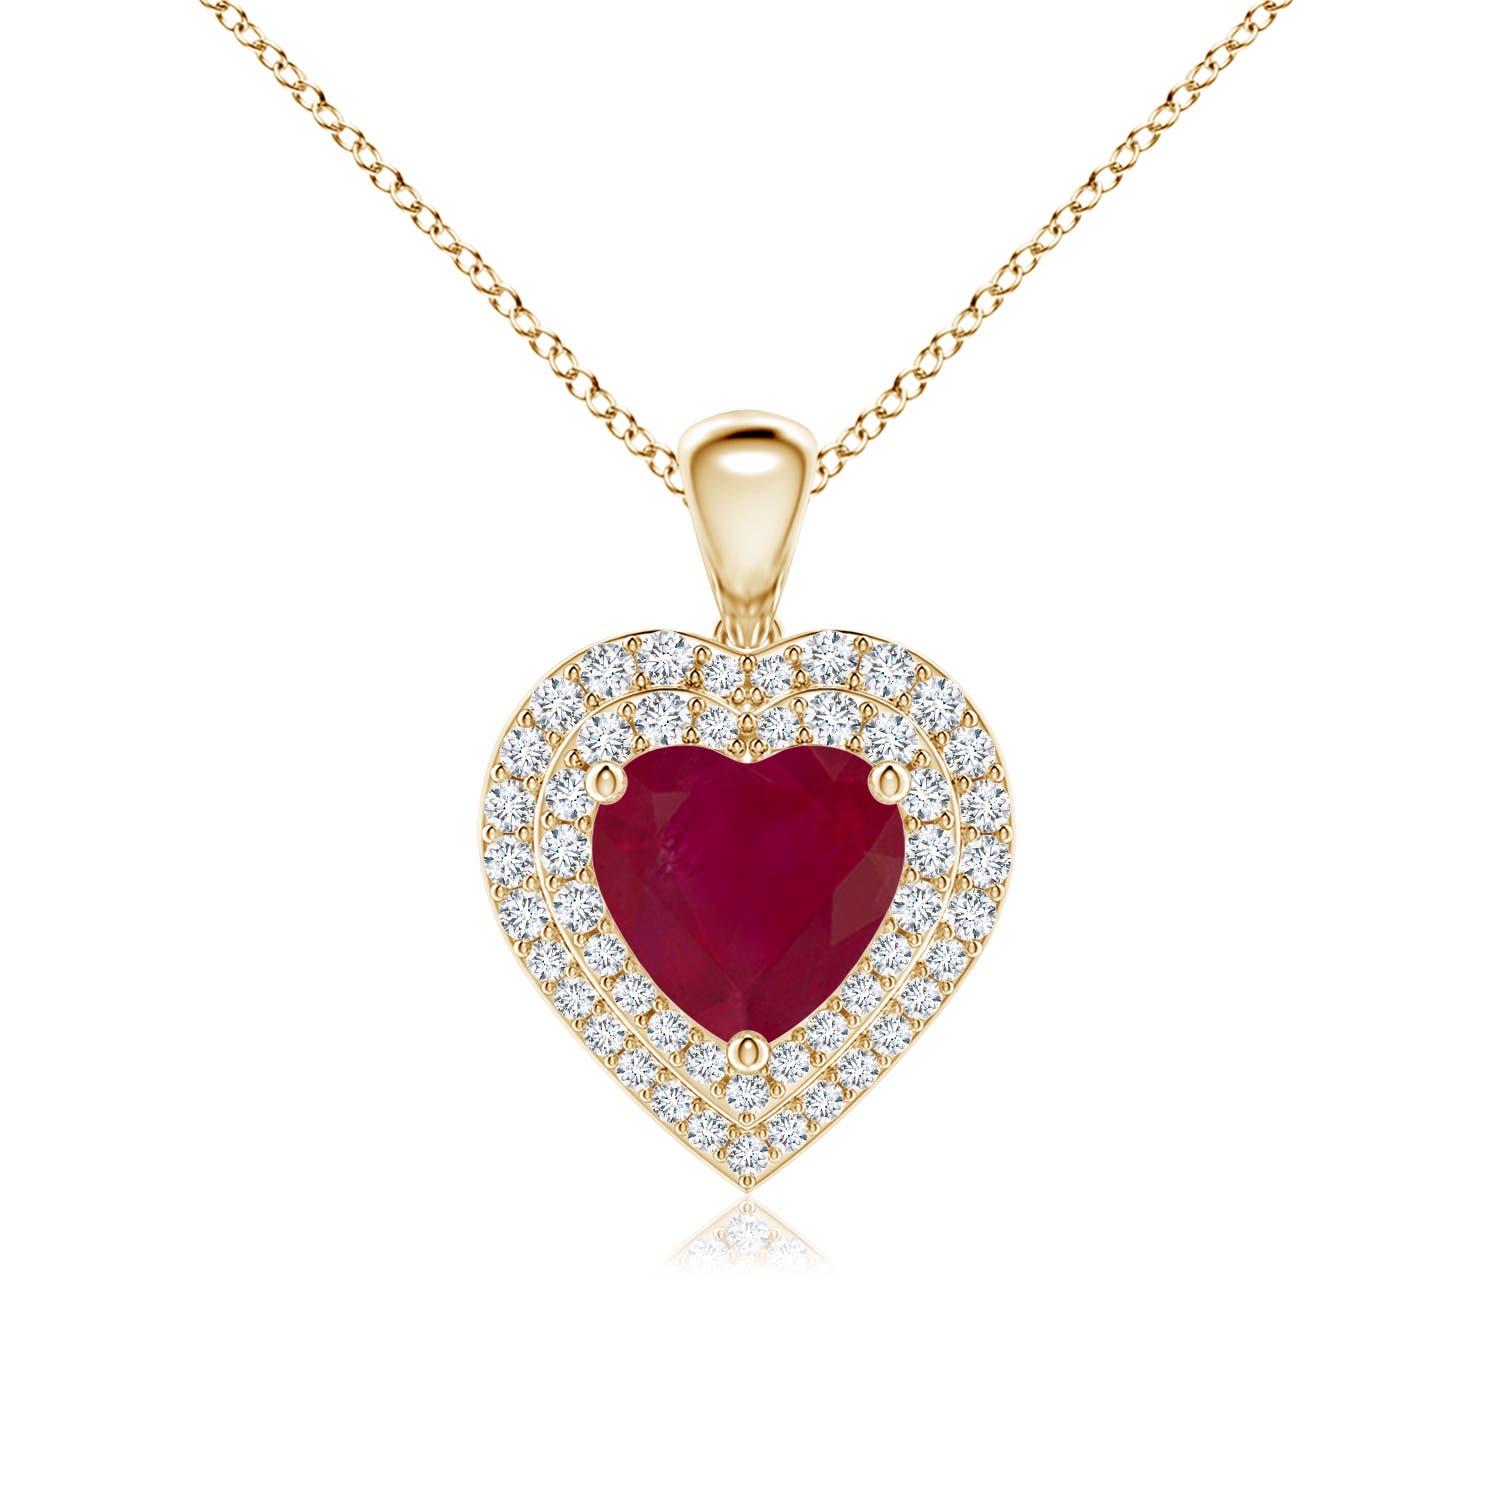 A - Ruby / 2.08 CT / 14 KT Yellow Gold